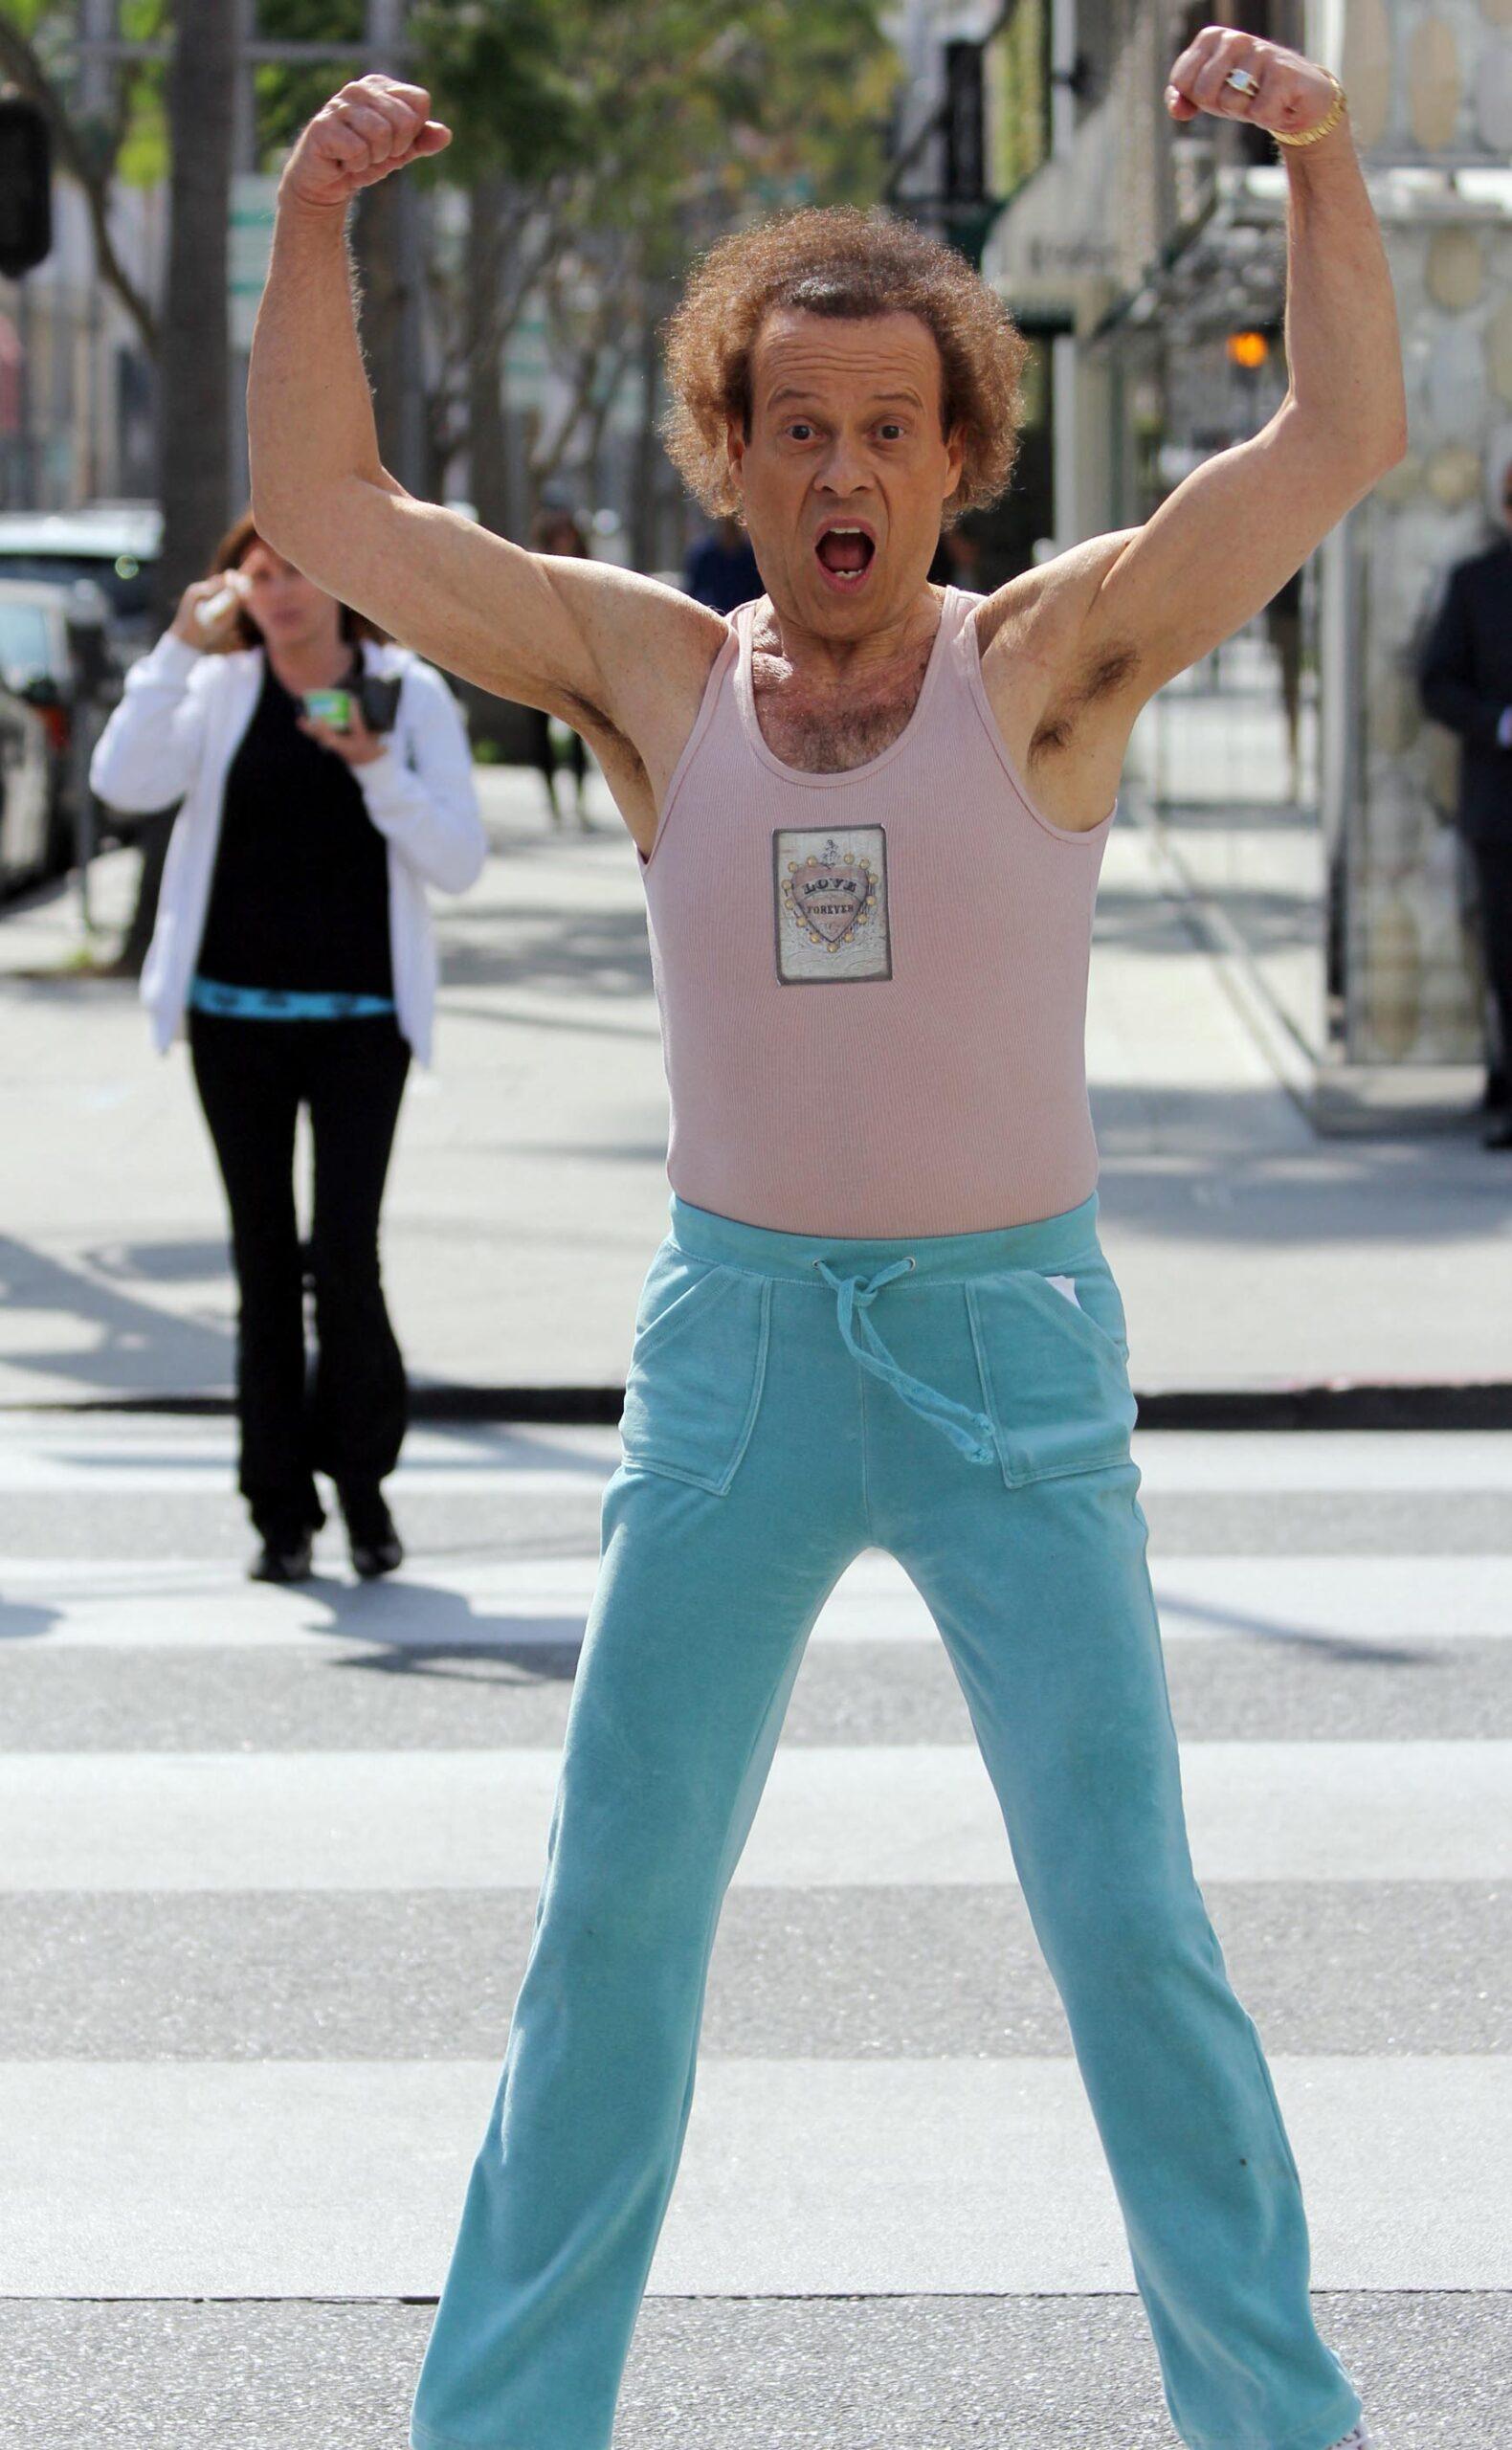 Richard Simmons Distances Self From Biopic On His Life Starring Comedian Pauly Shore